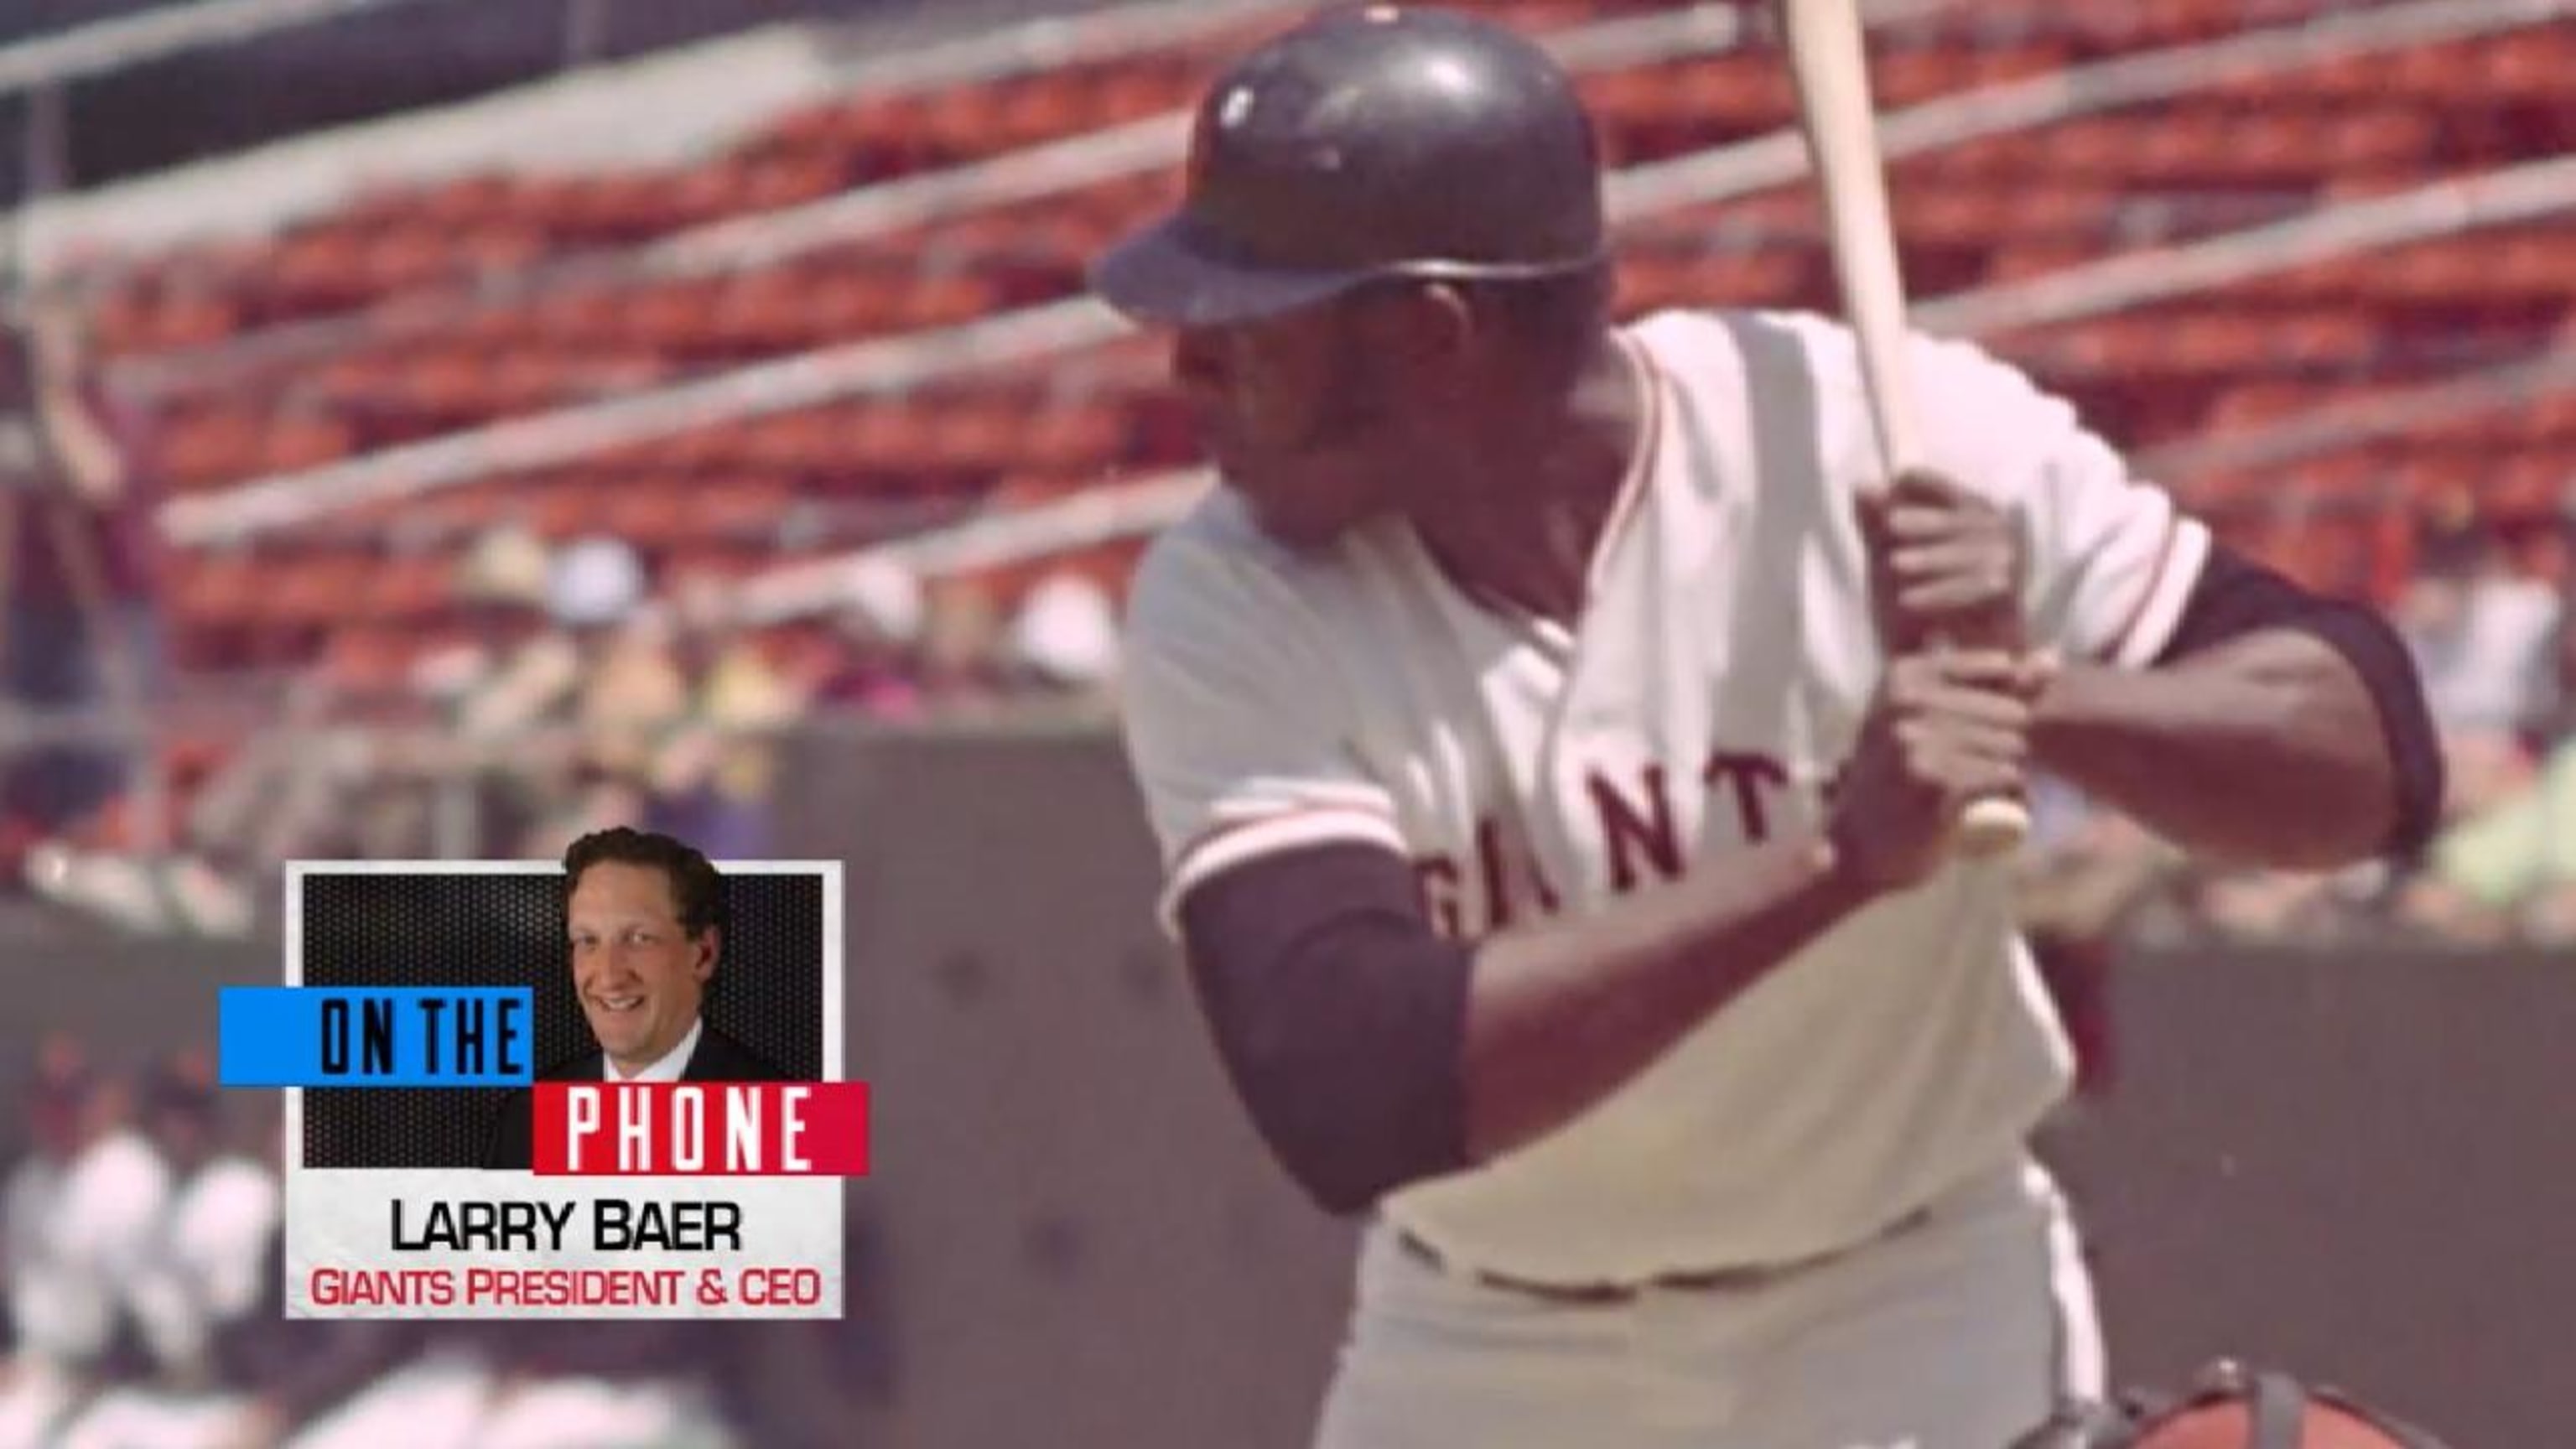 willie mccovey swing